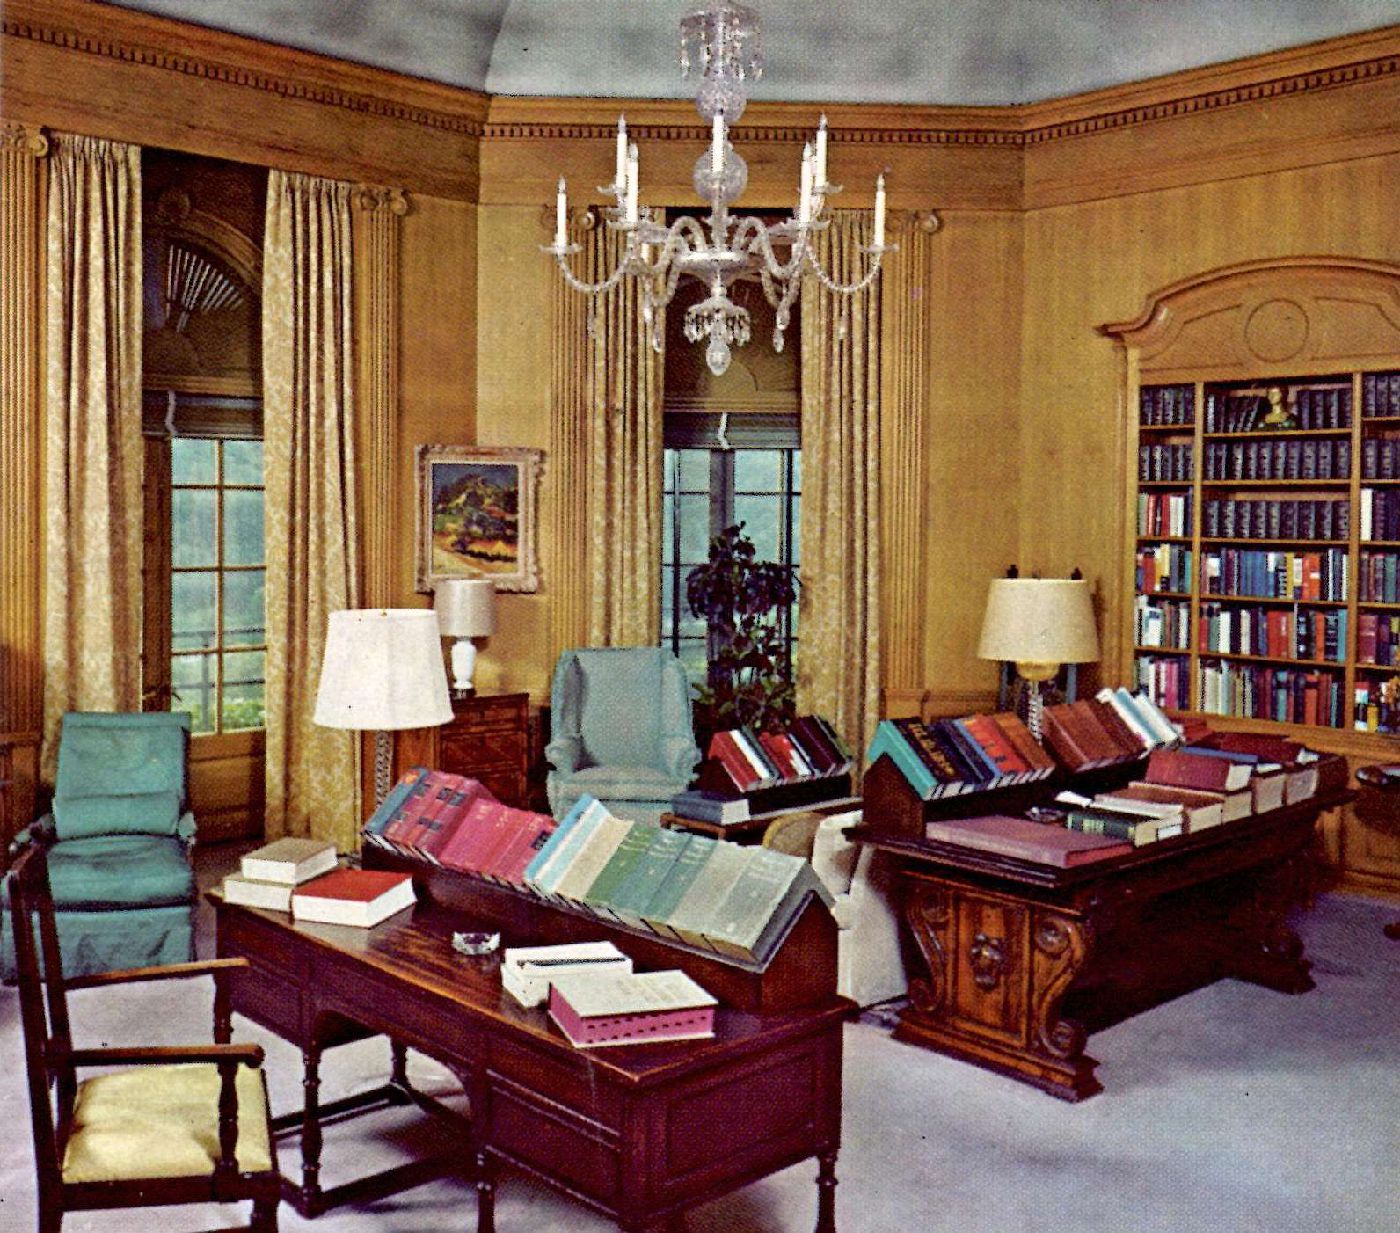 Editorial library at Reader's Digest headquarters, Chappaqua, 1977